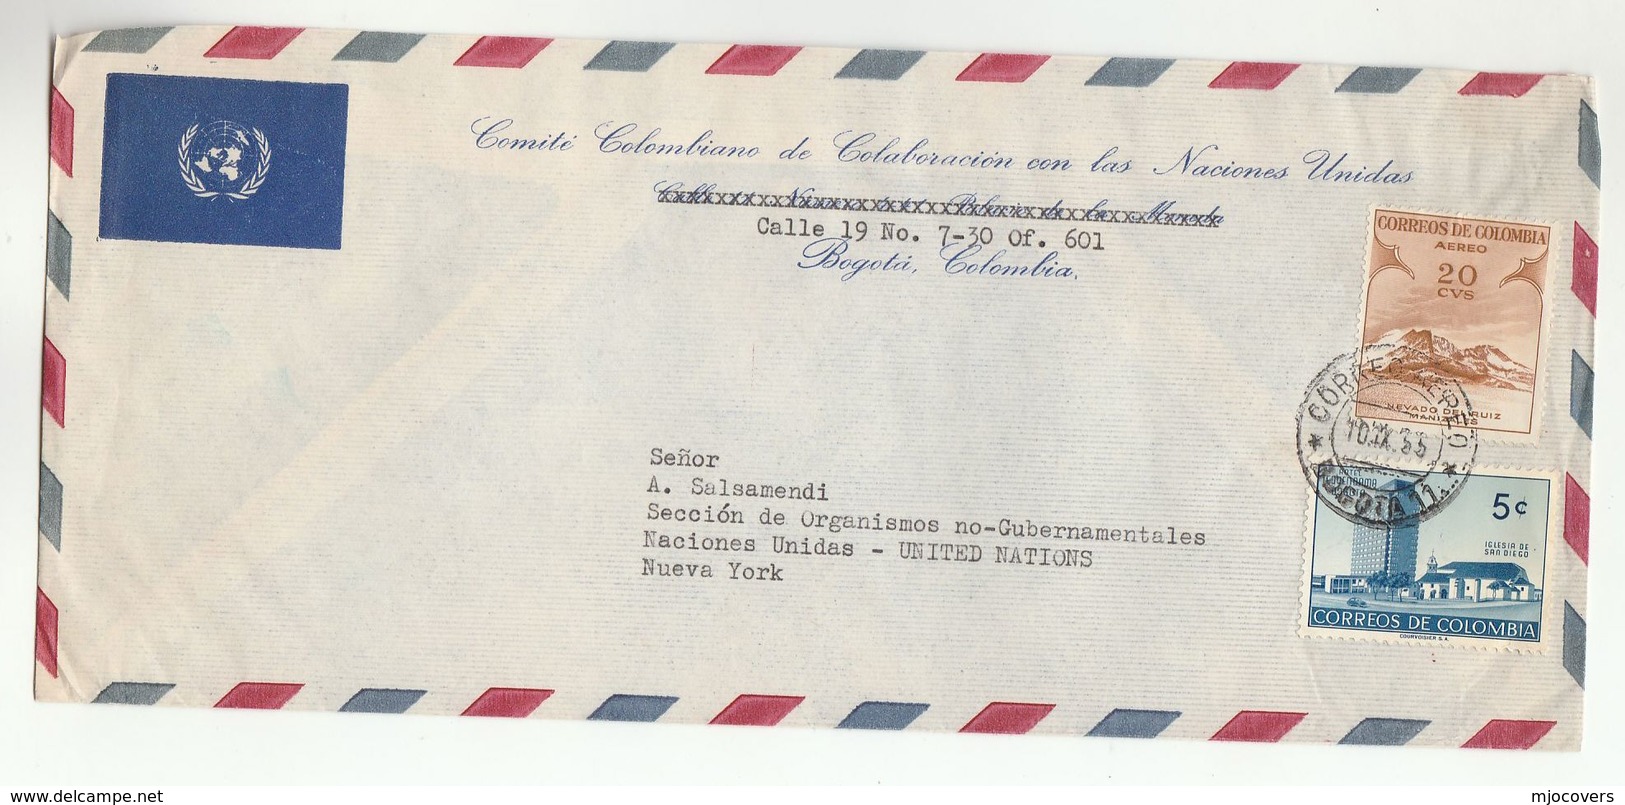 1955 UN In COLOMBIA COMMITTEE OF COLLABORATION WITH UNITED NATIONS Cover Airmail To  UN NY USA  Stamps - Colombia